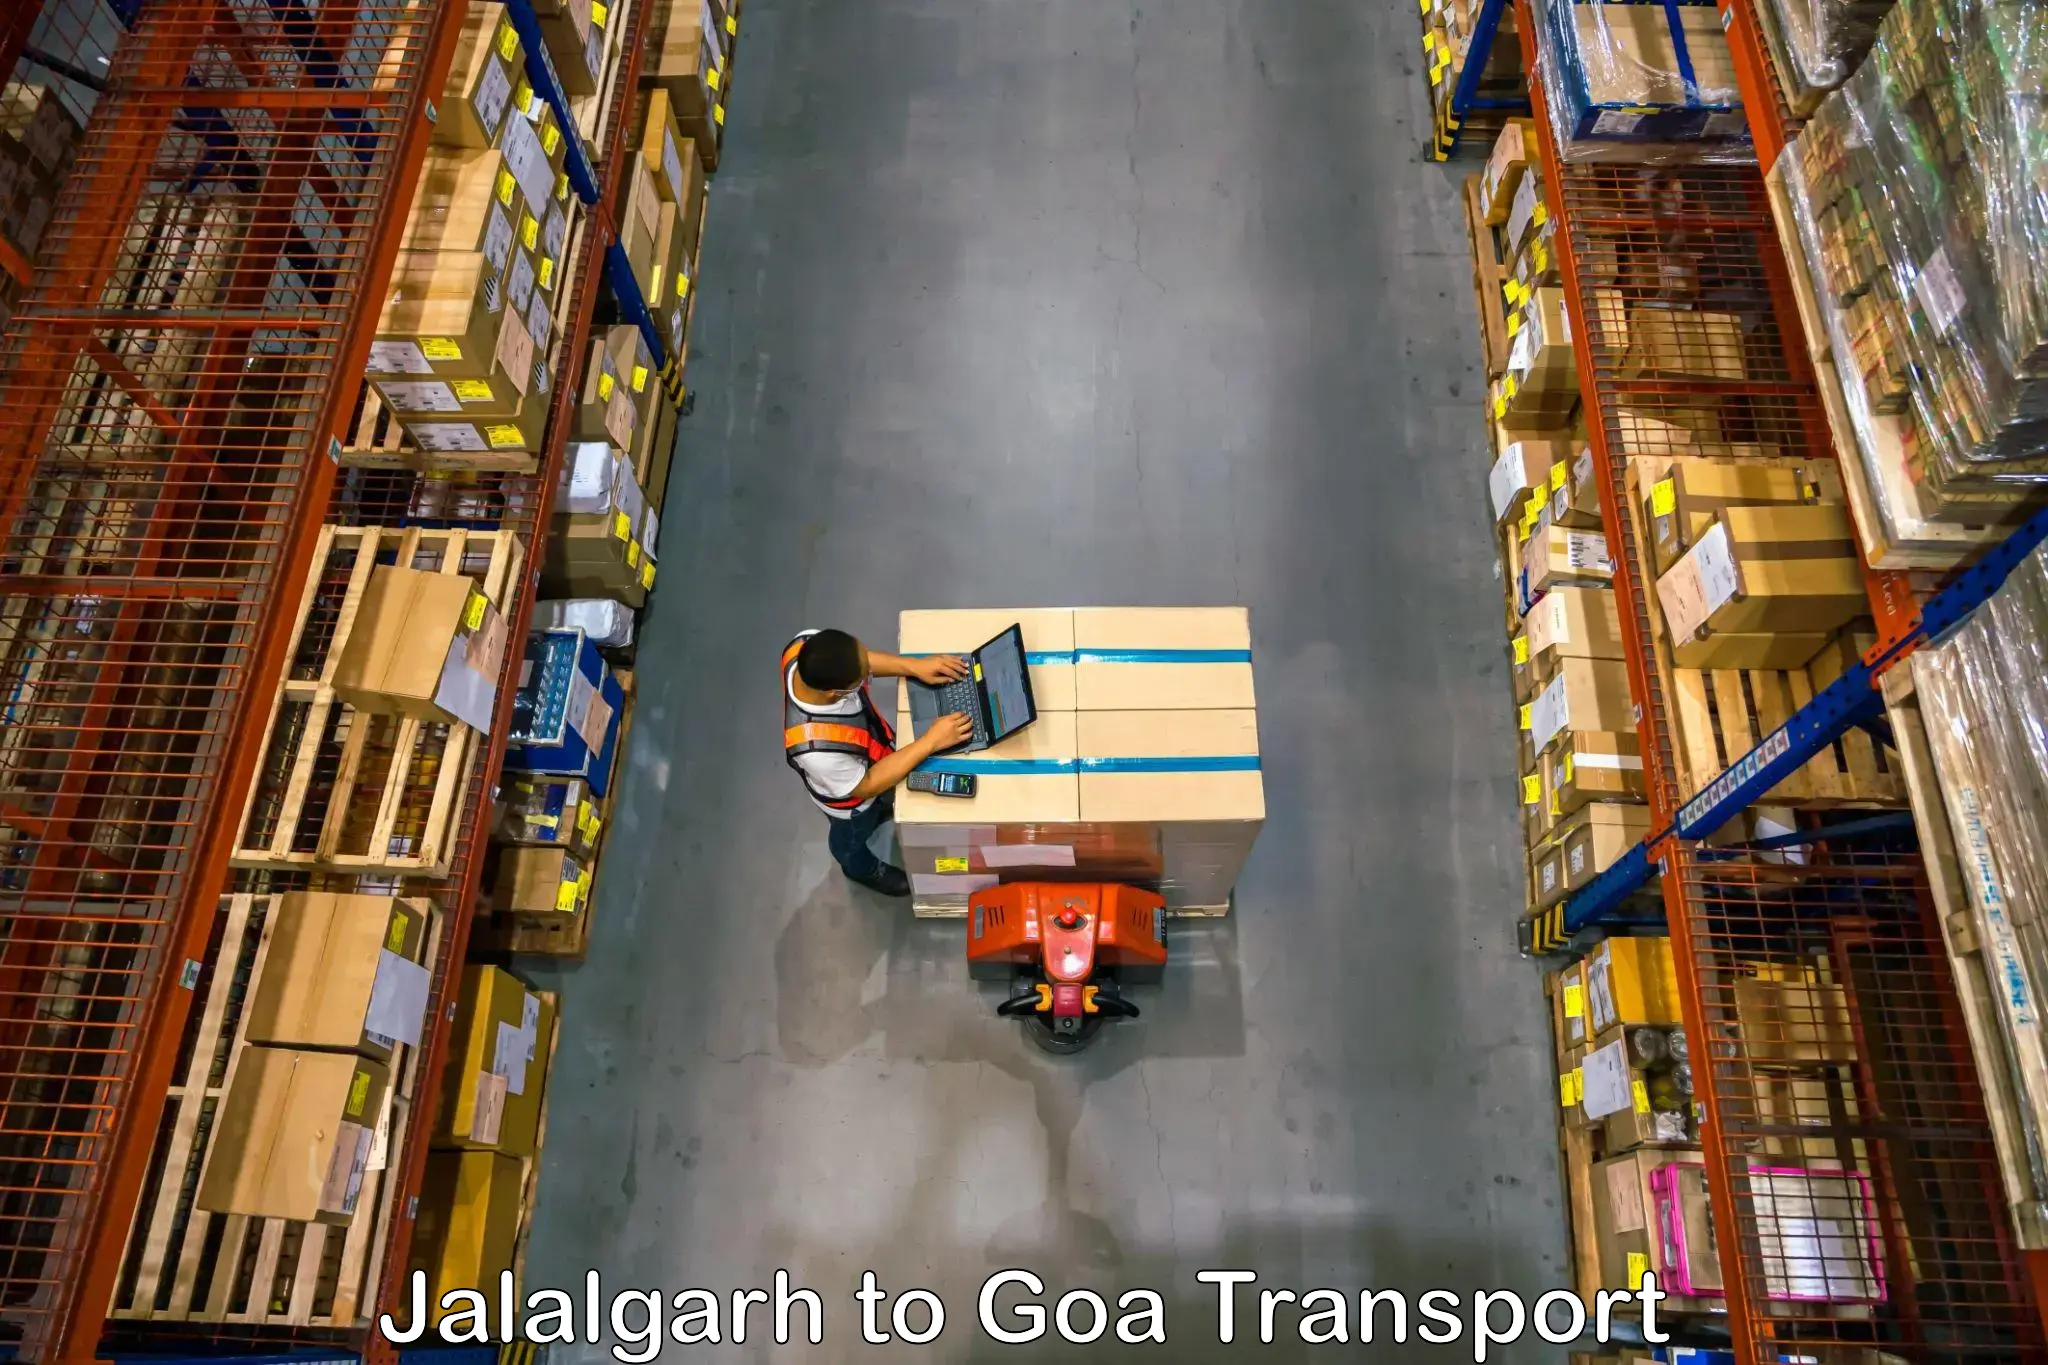 Transport bike from one state to another in Jalalgarh to IIT Goa